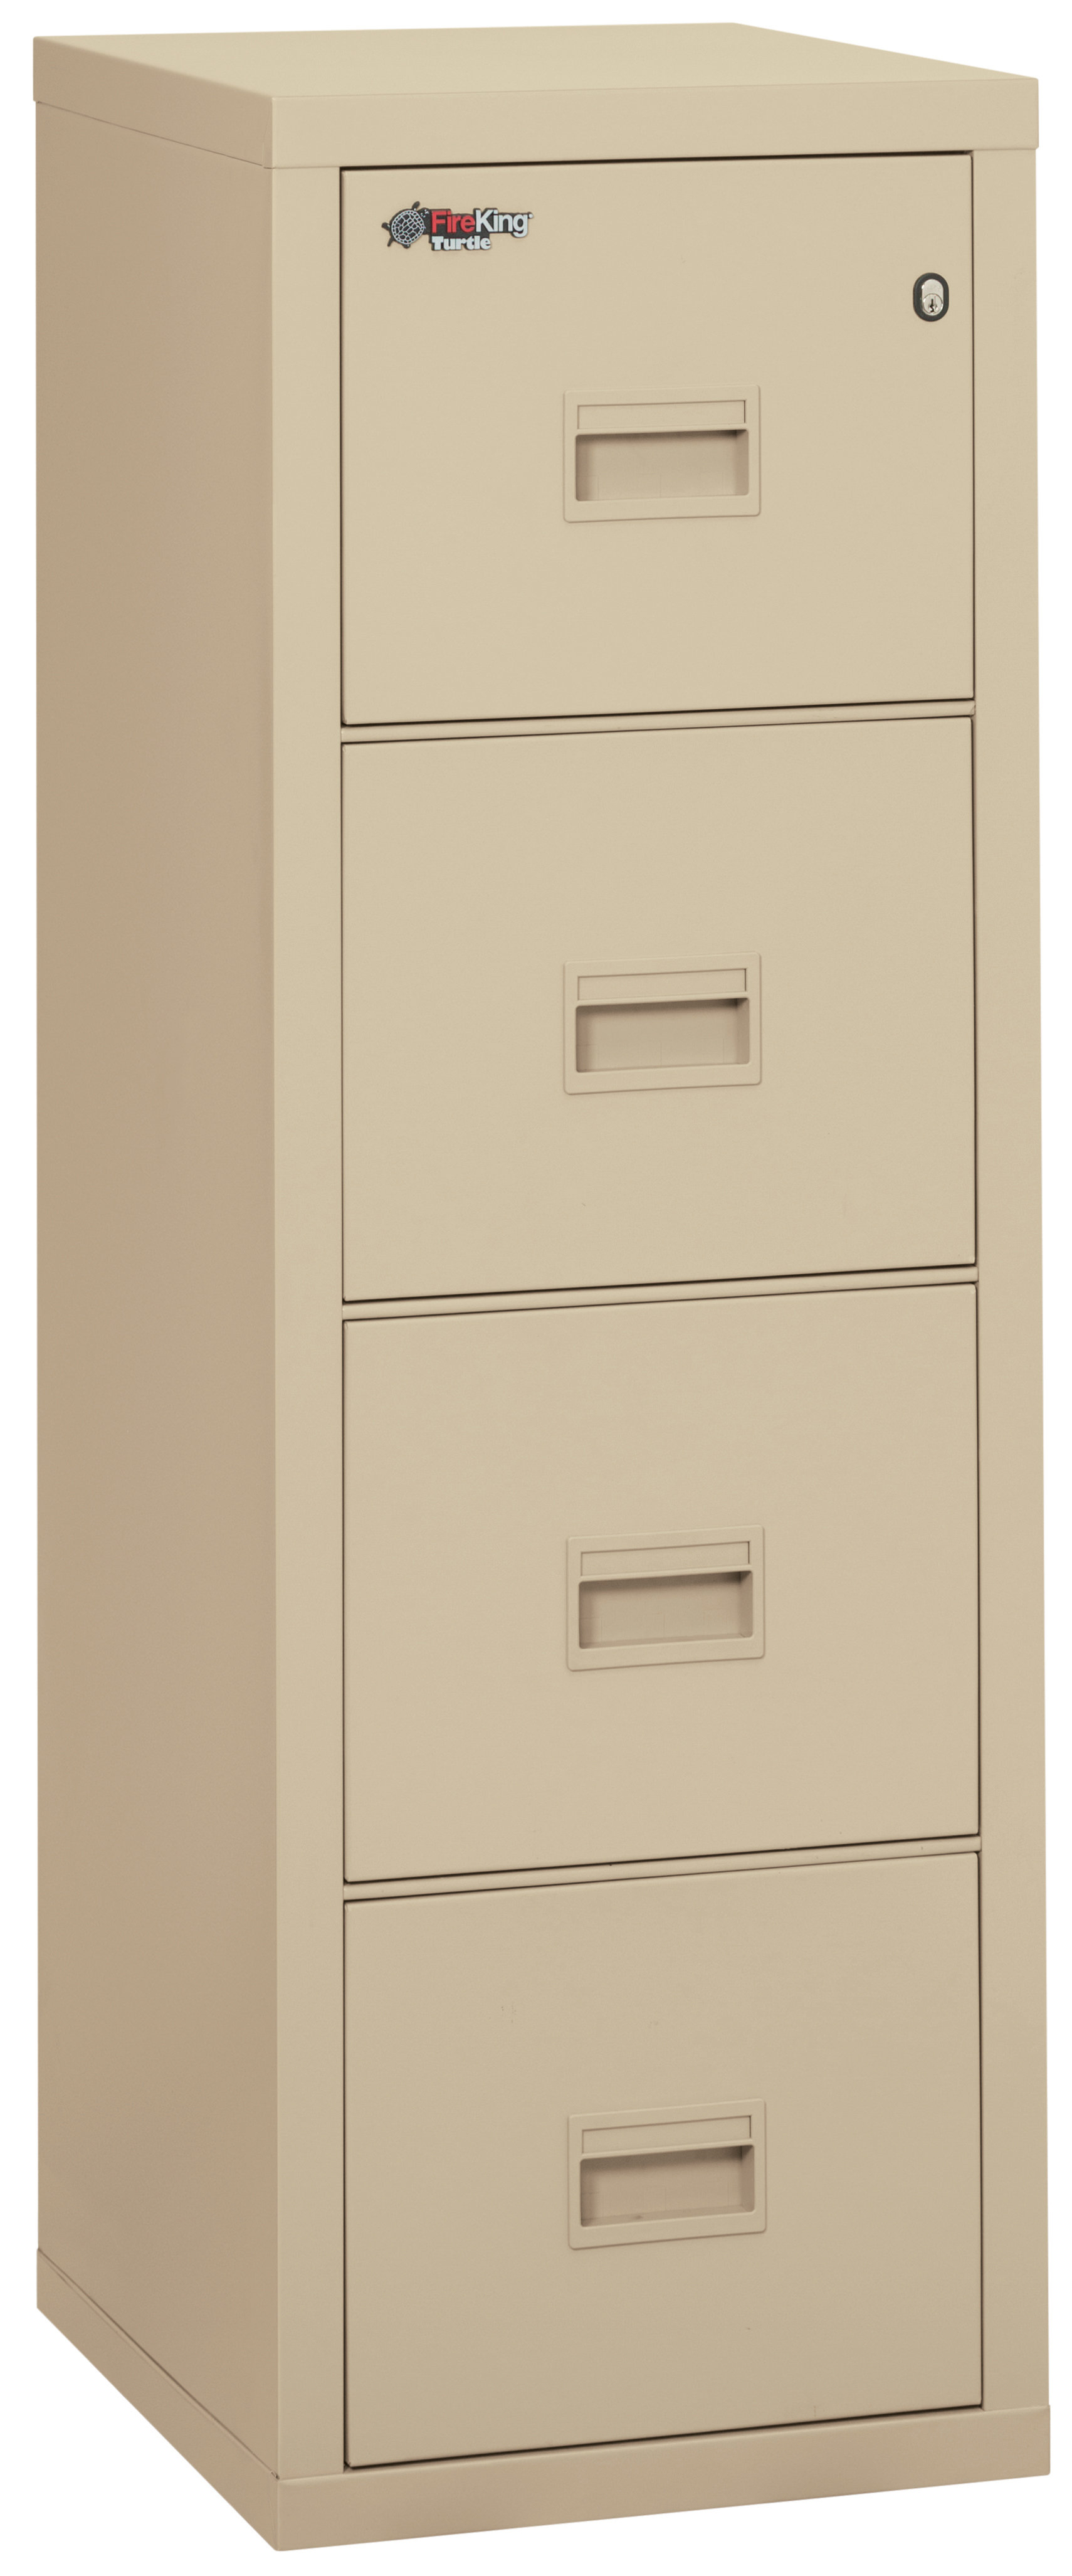 Fireking Turtle Fireproof 4 Drawer Vertical File Cabinet Reviews pertaining to proportions 1710 X 4108